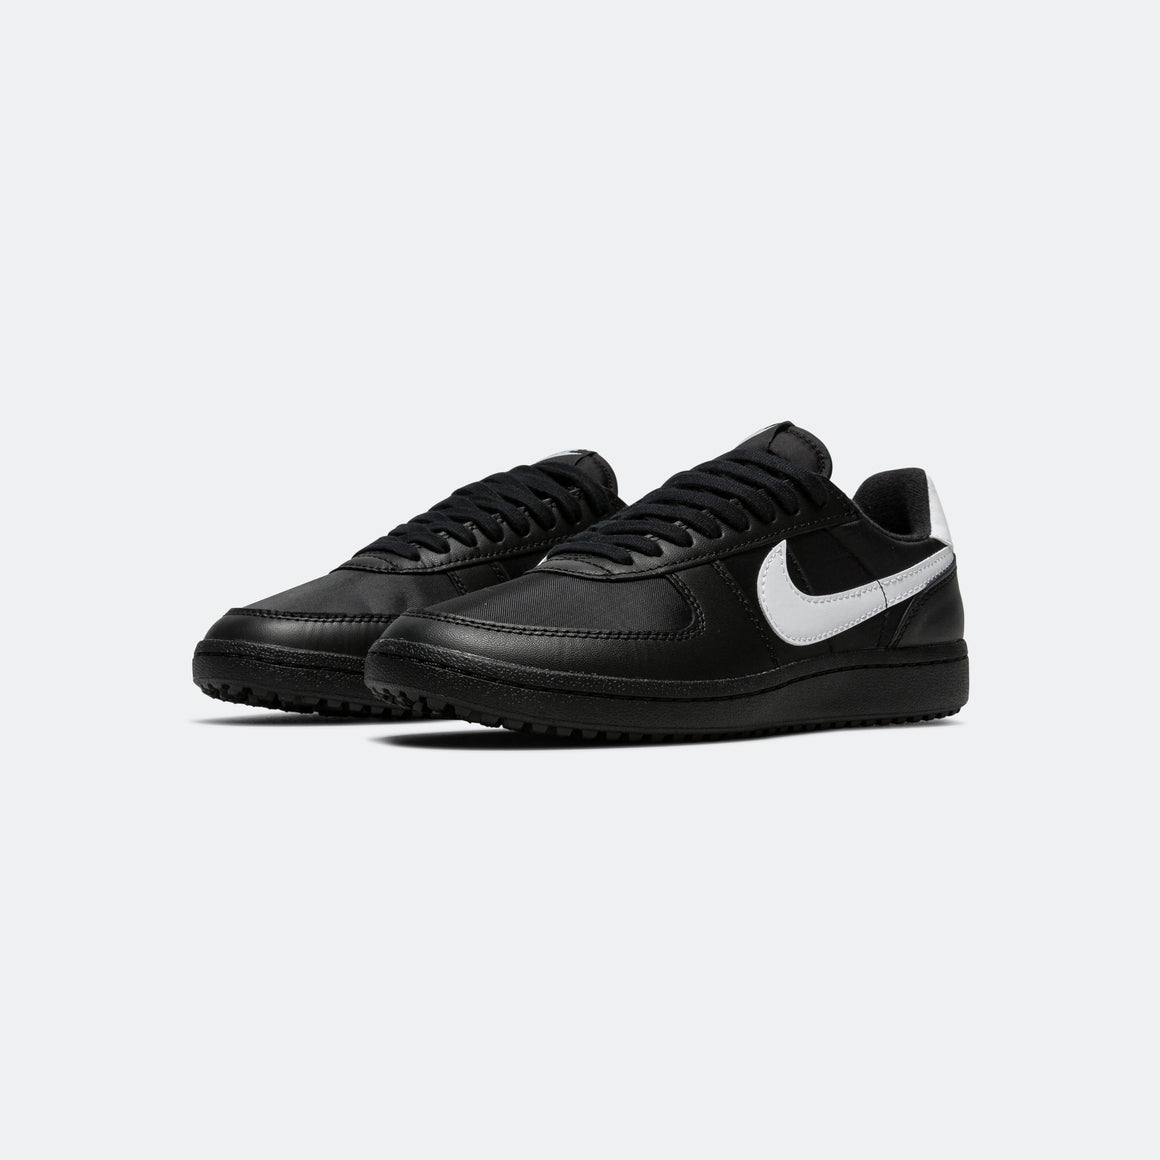 Nike - Field General 82 SP - Black/White-Black - UP THERE